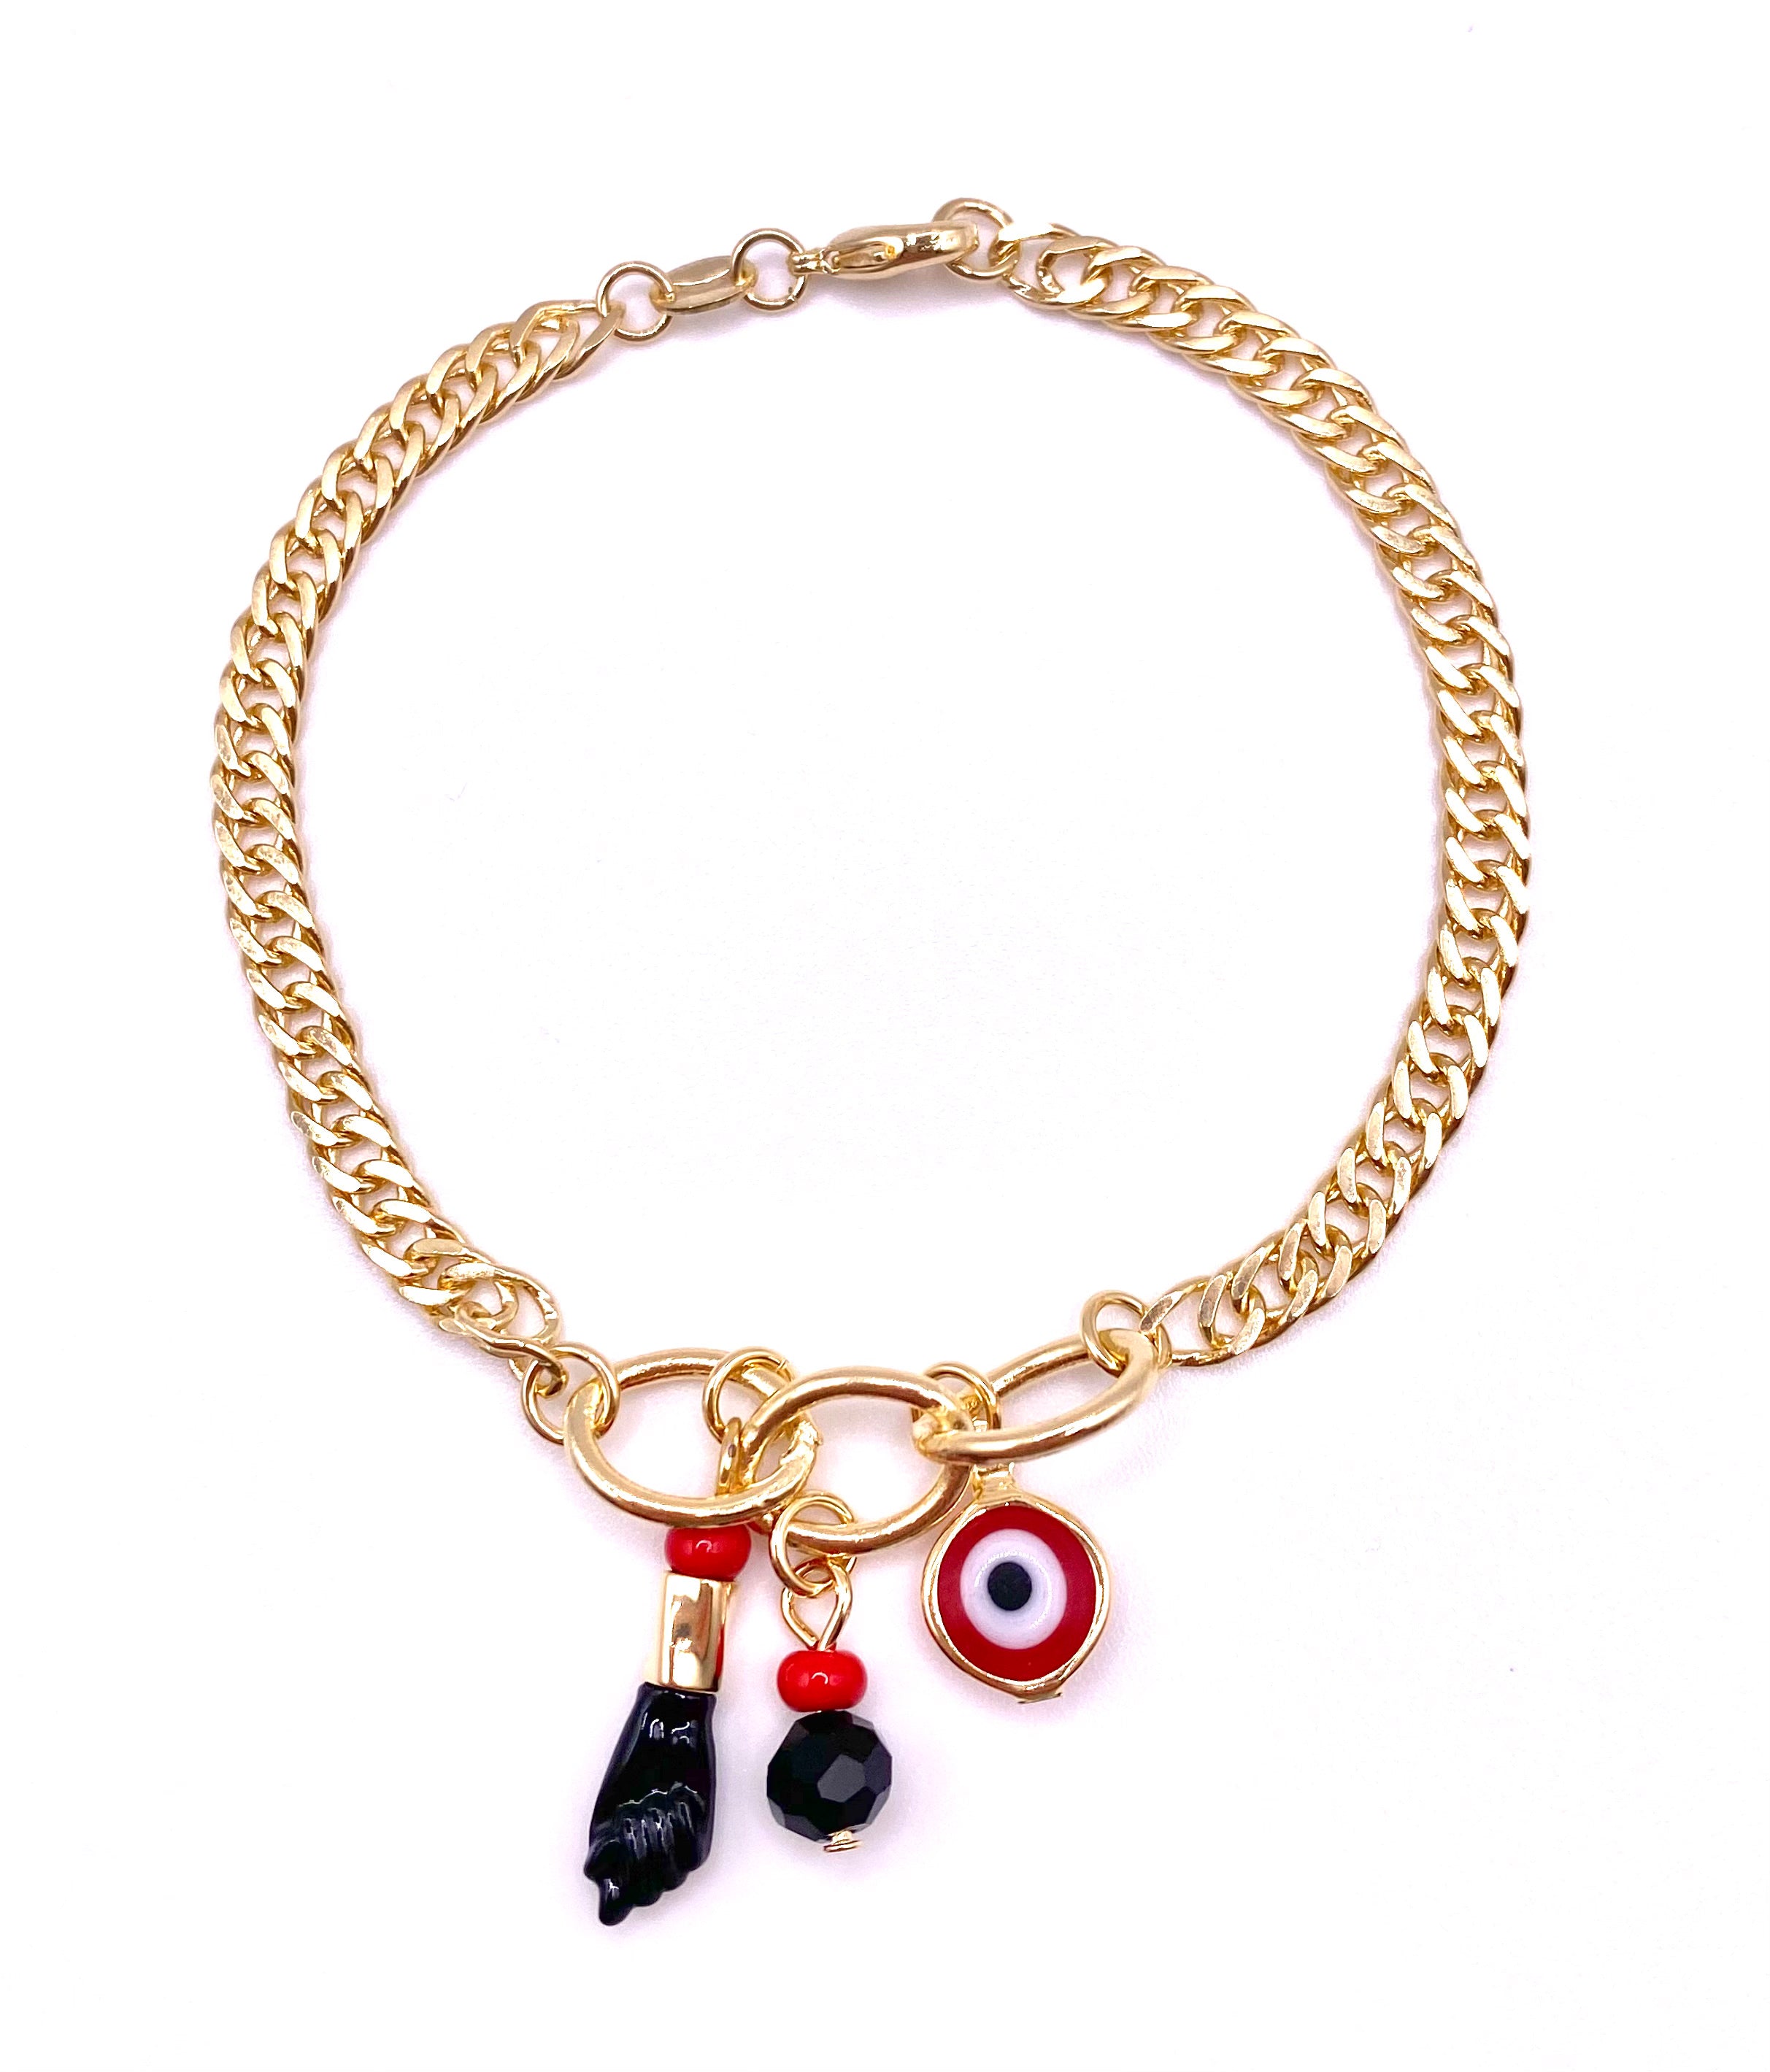 Unisex Evil Eye Protection Simulated Azabache Charm Bracelet For Babies And  Infants | lupon.gov.ph